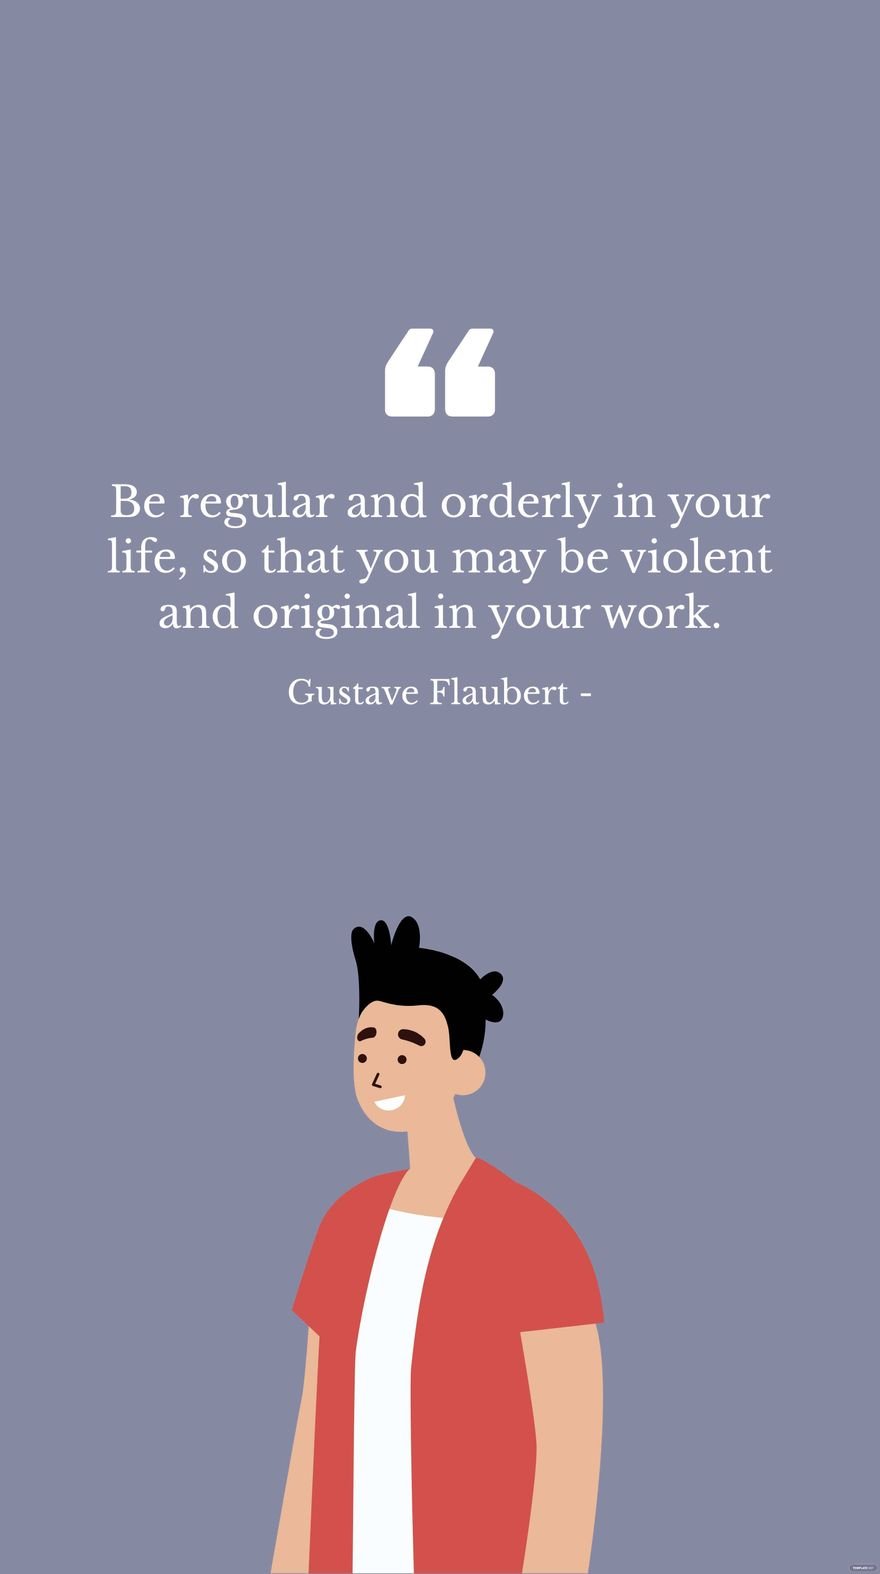 Free Gustave Flaubert - Be regular and orderly in your life, so that you may be violent and original in your work. in JPG